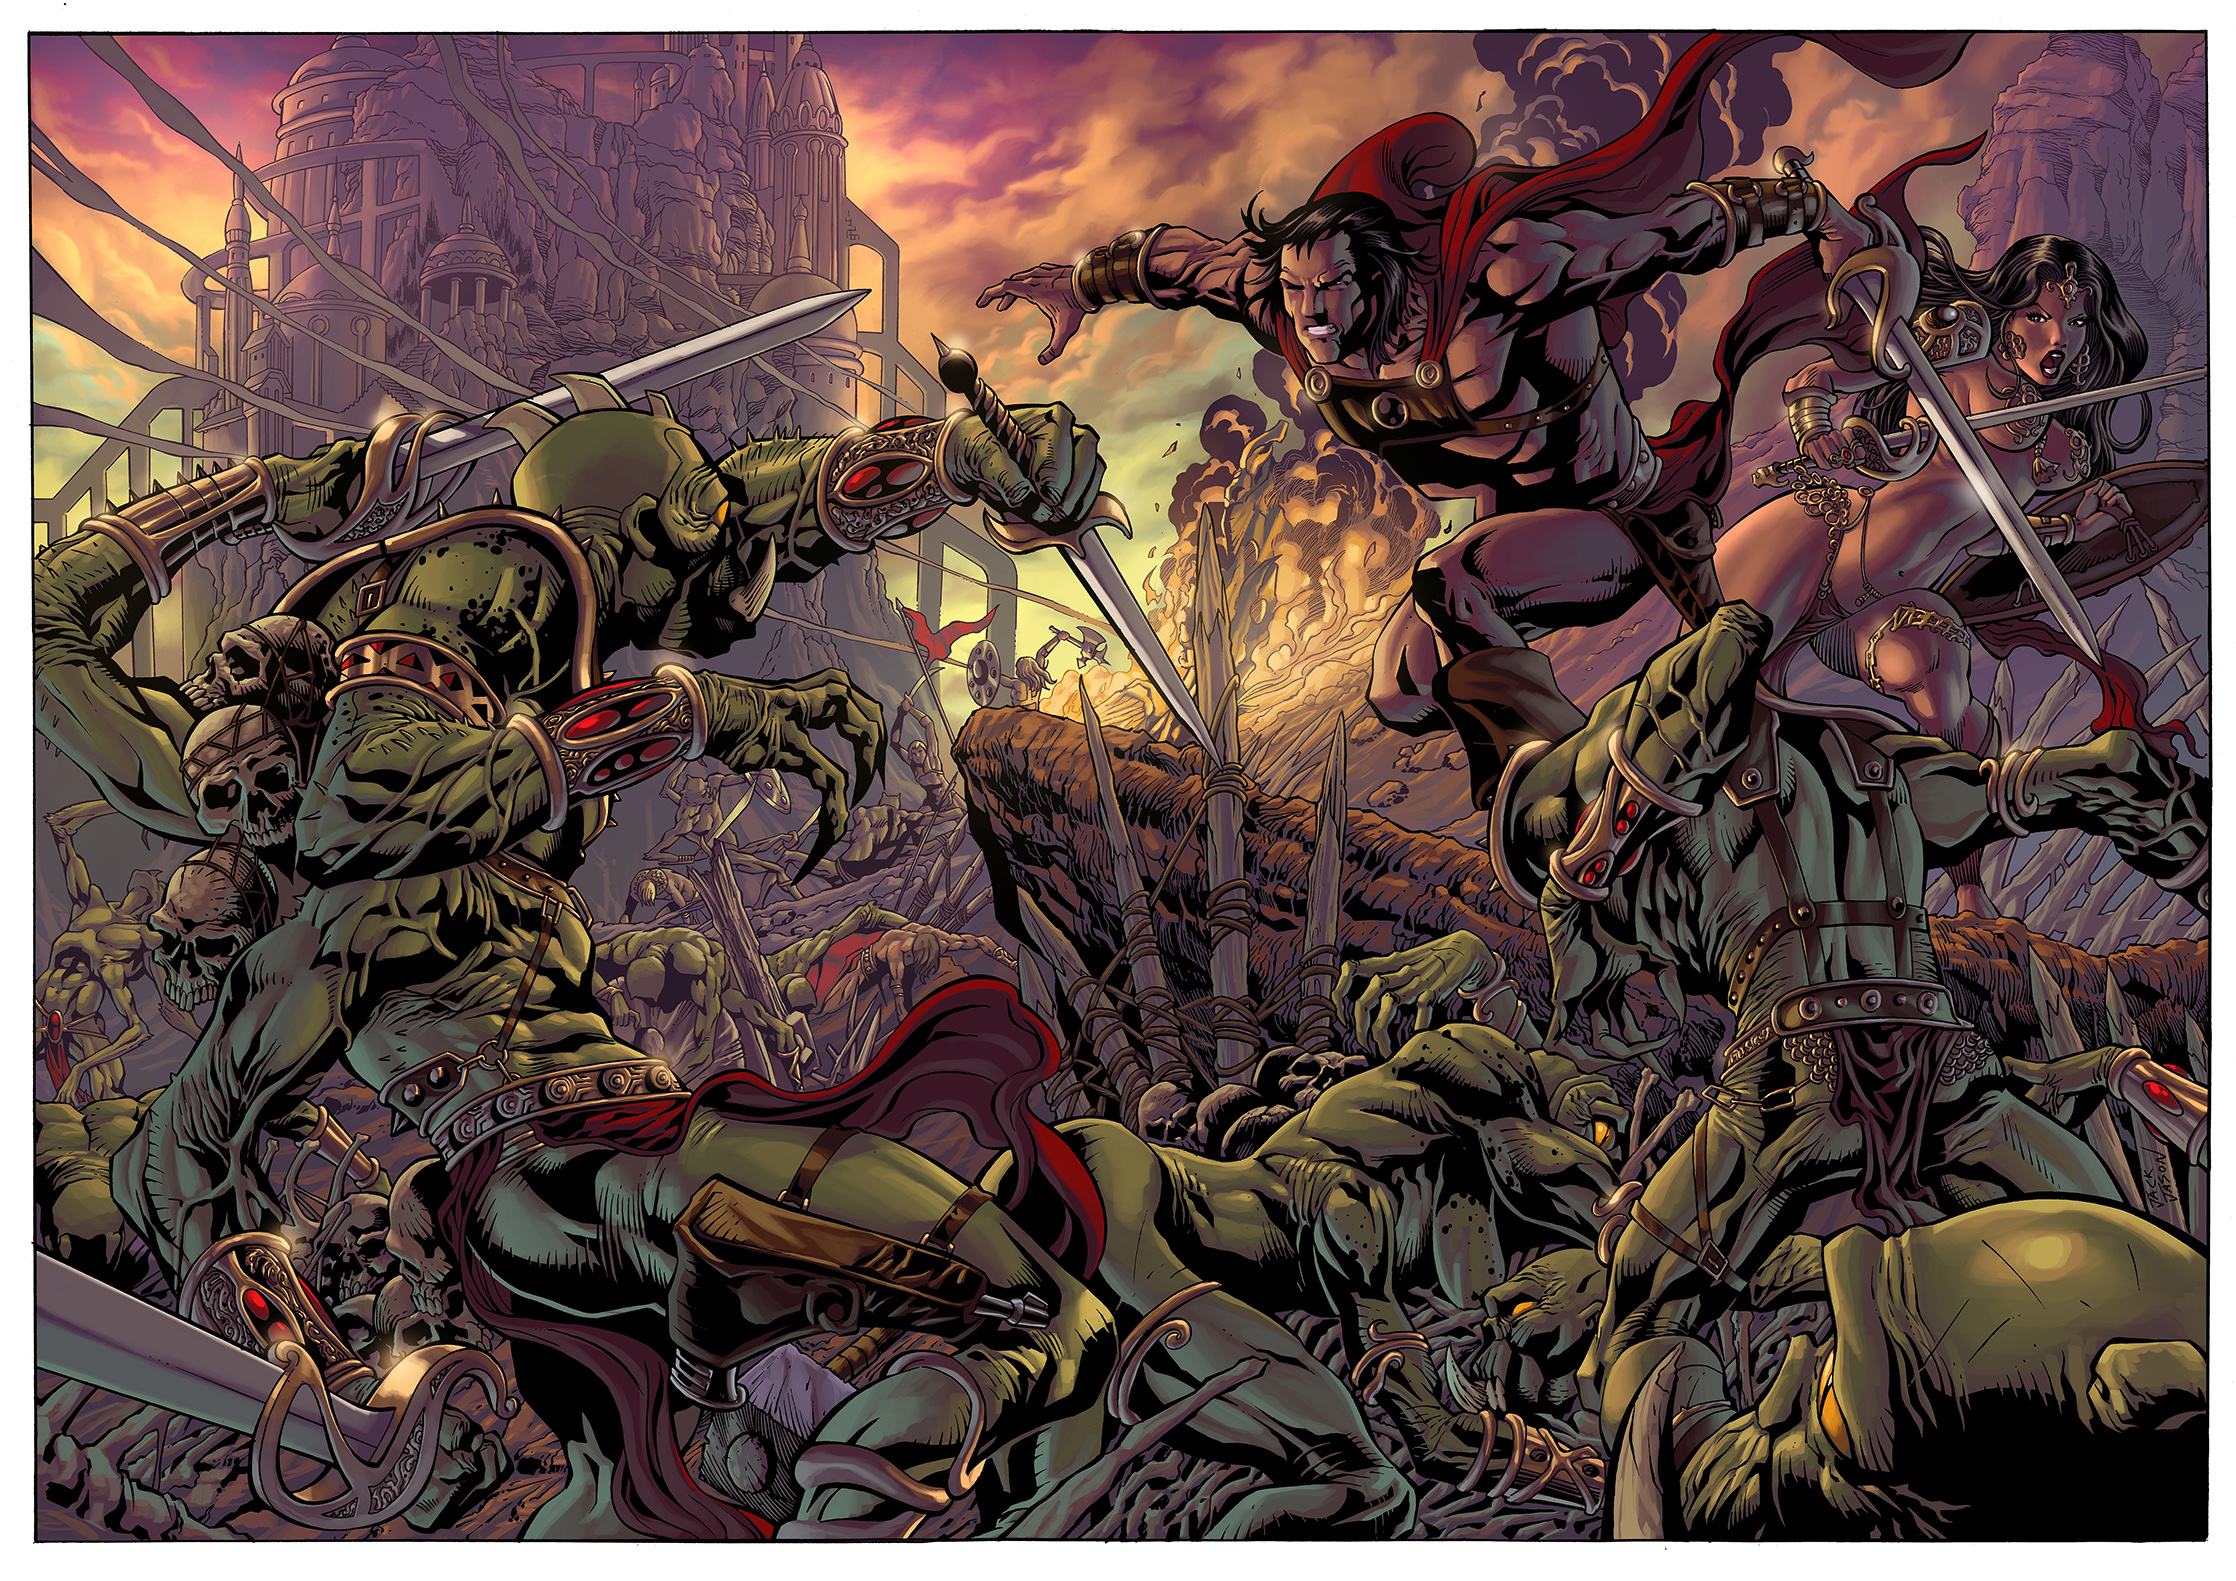 Warlords Of Mars #3